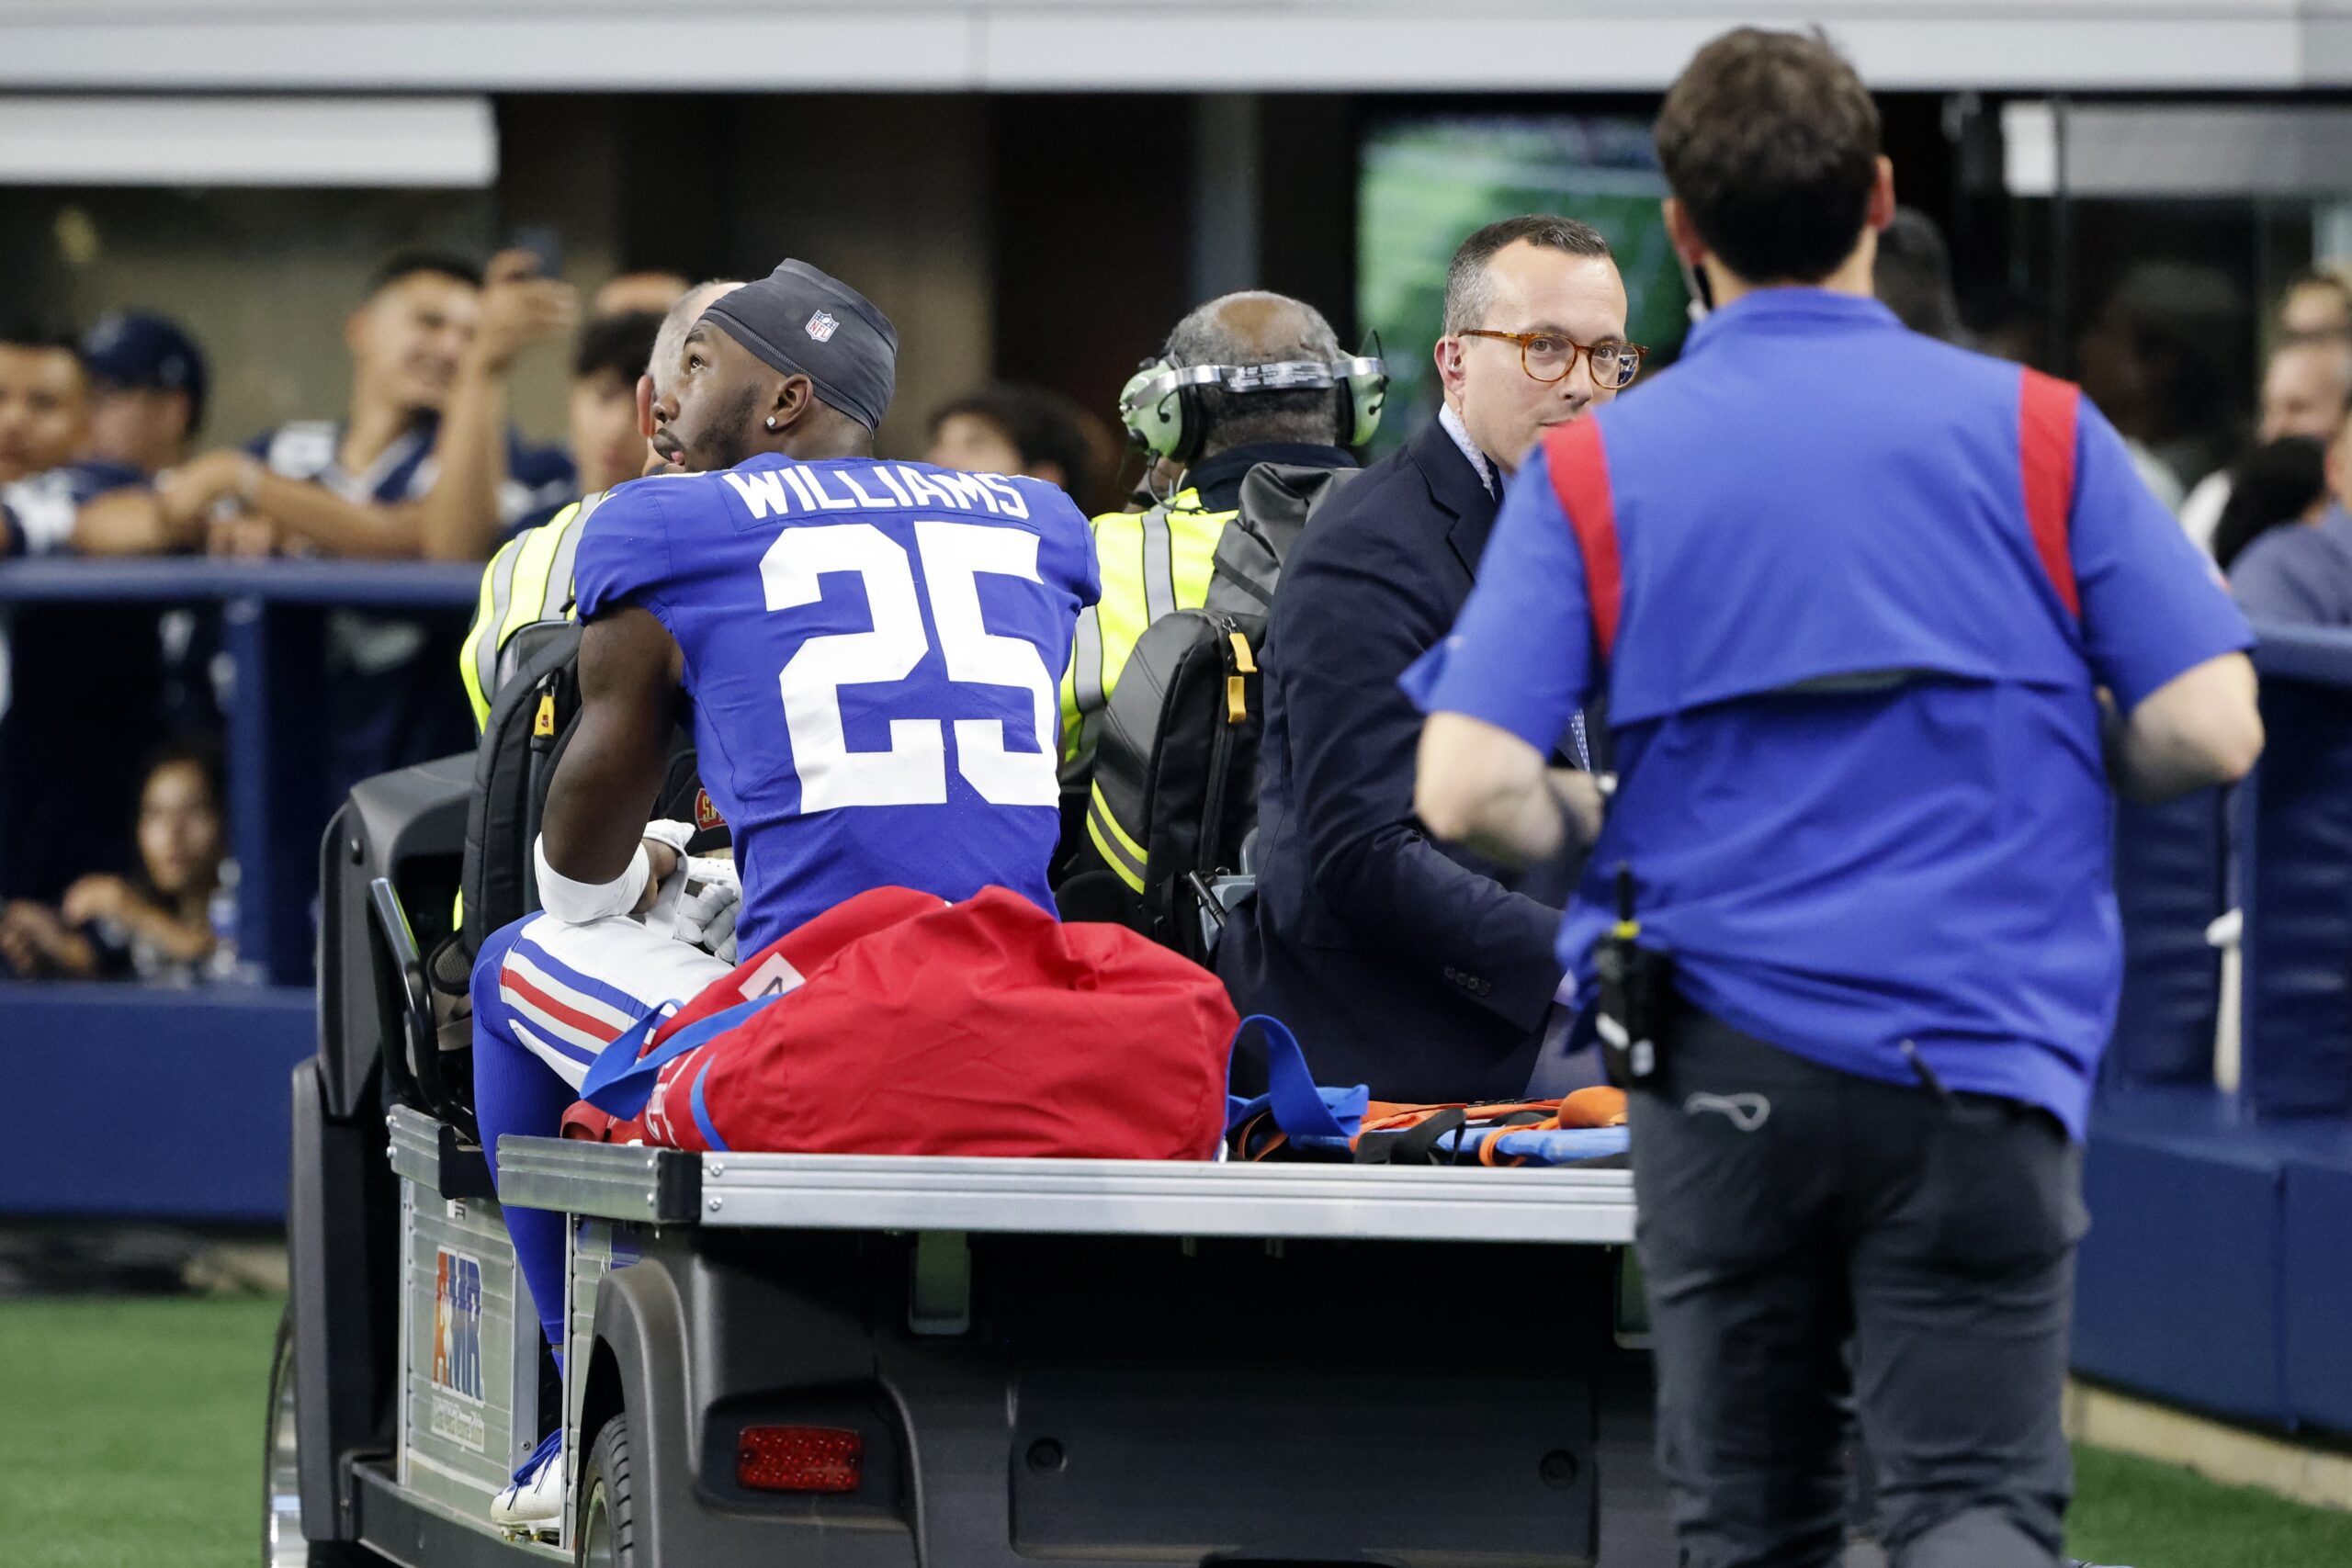 Lawrence Tynes on Giants’ injury woes: Players were over-worked